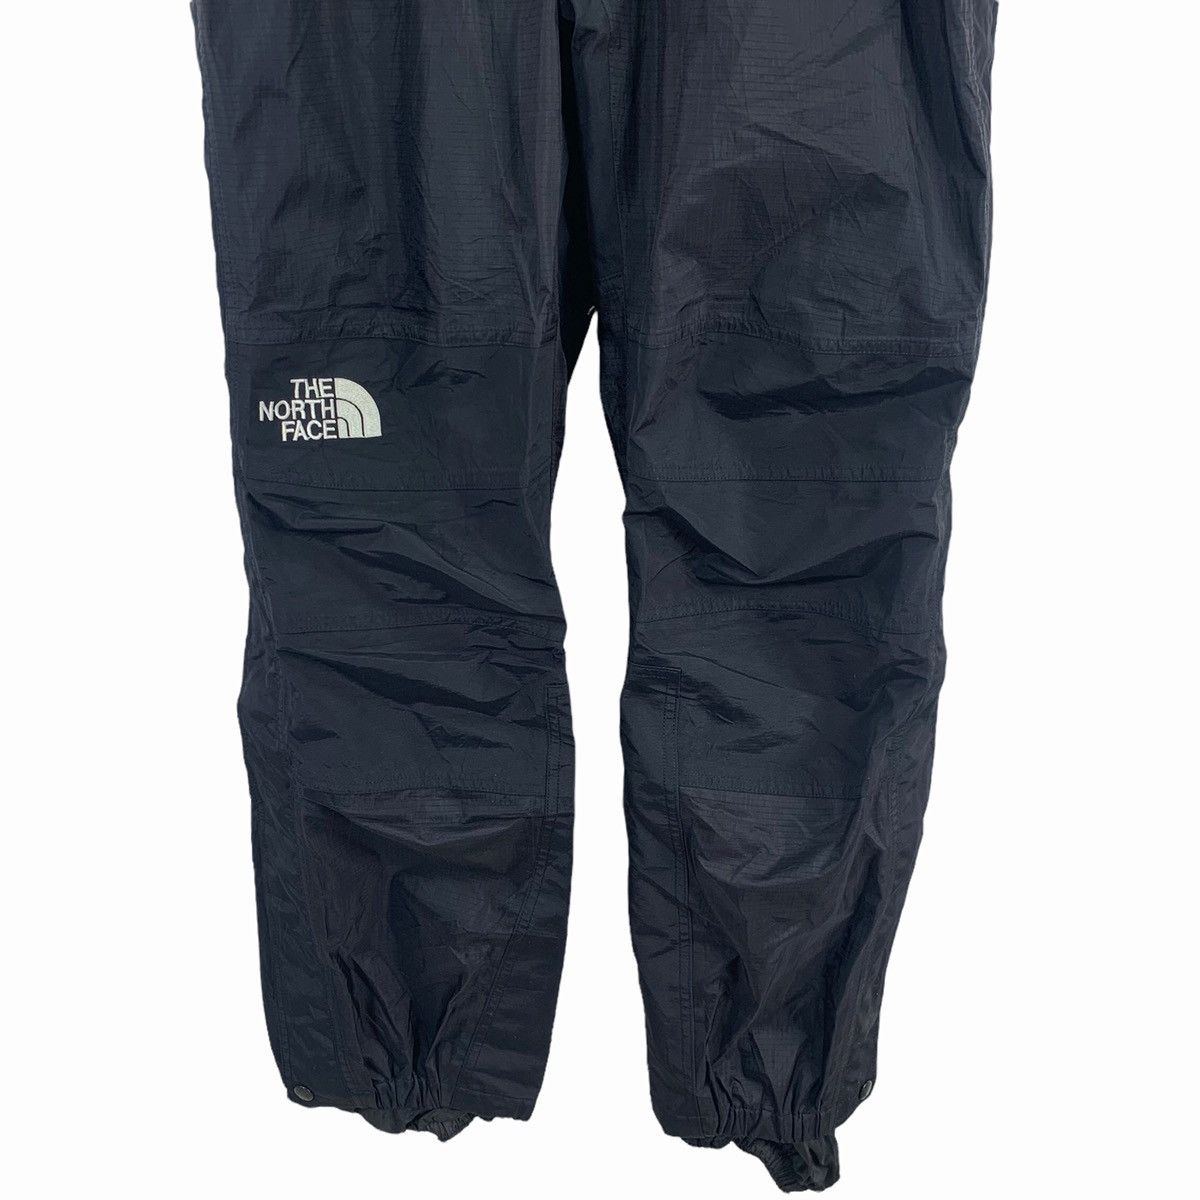 The North Face VINTAGE TNF THE NORTH FACE GORETEX OVERALL Size US 34 / EU 50 - 7 Thumbnail